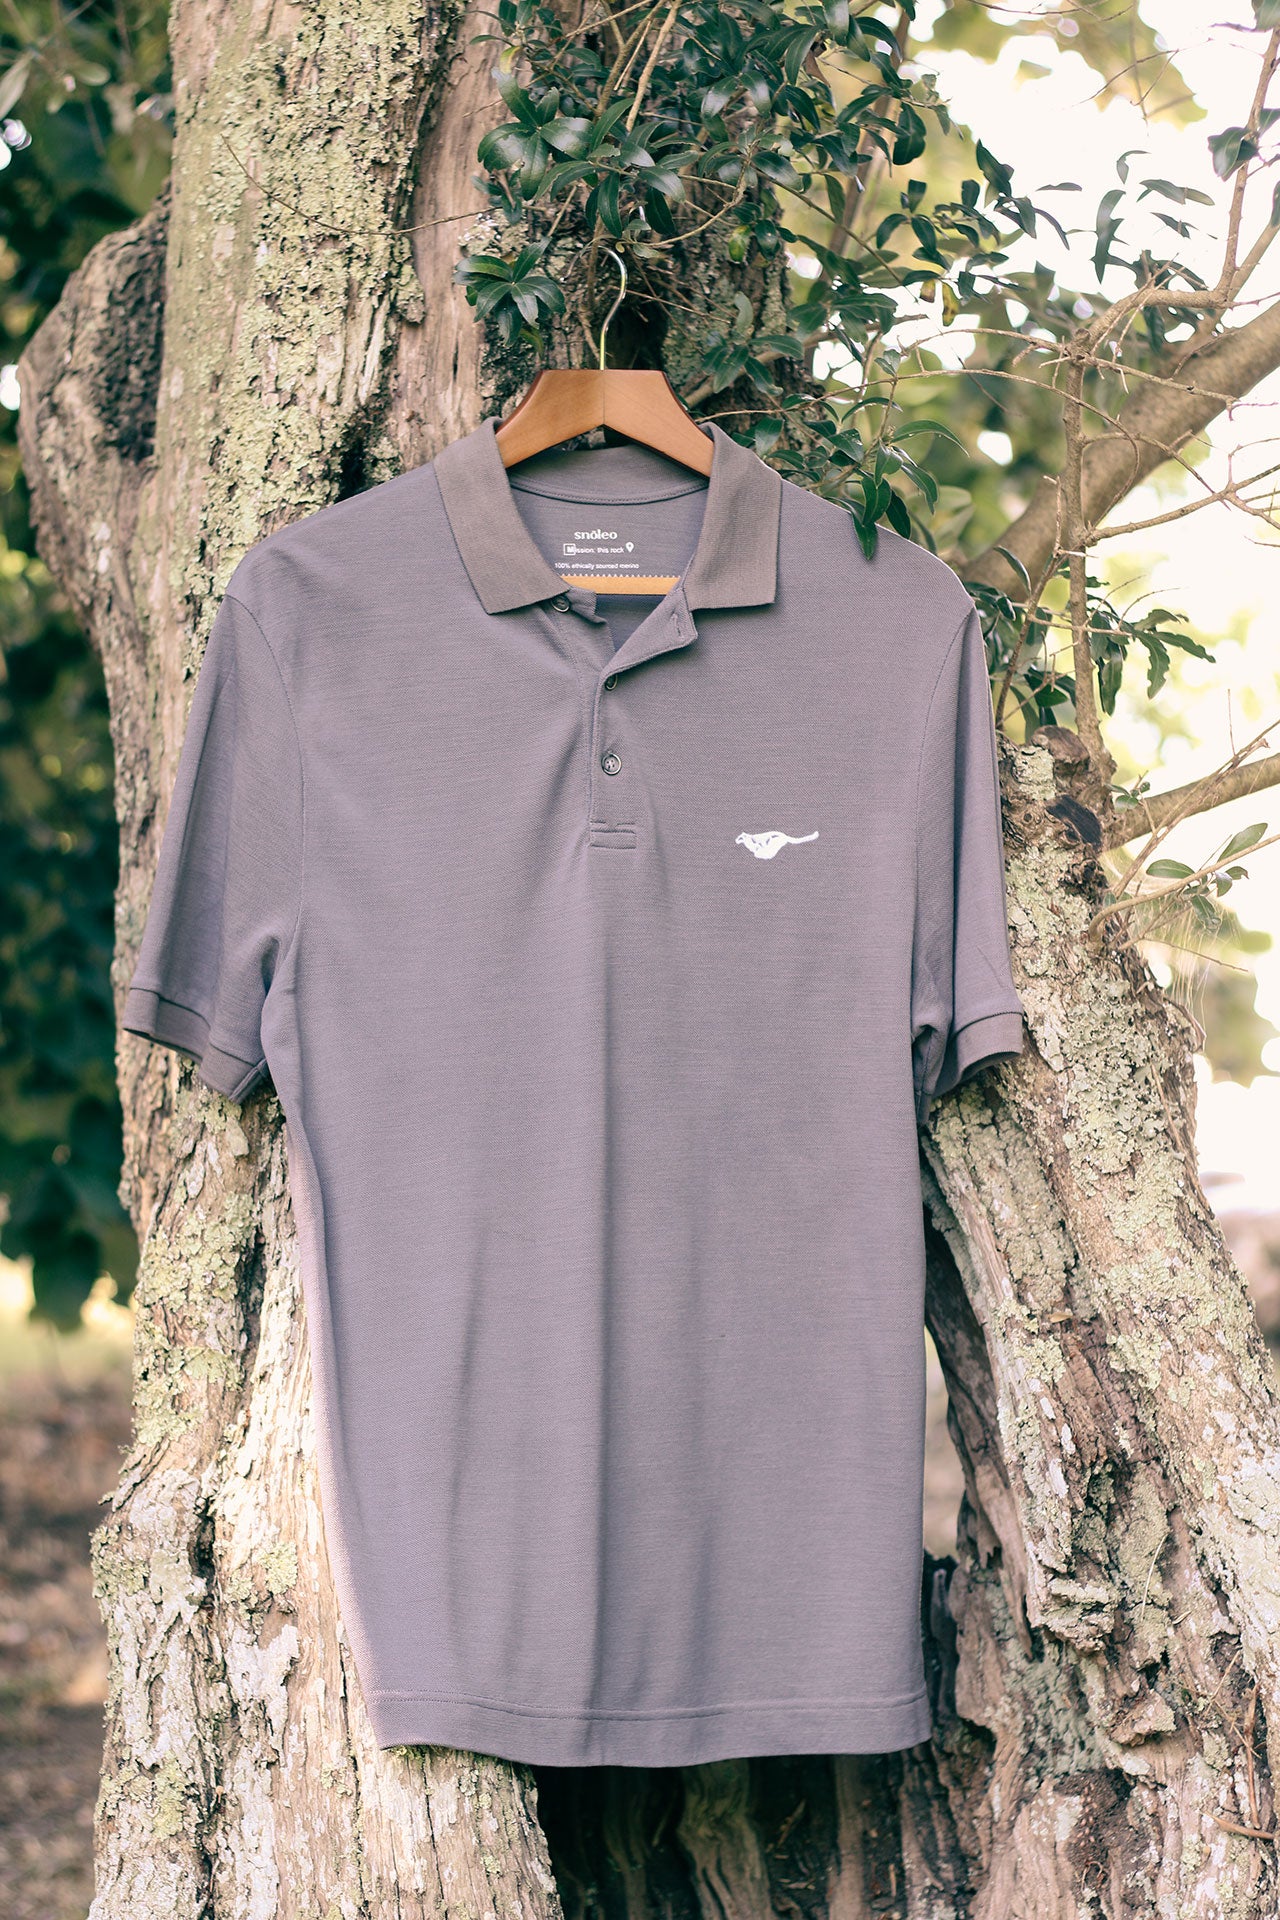 granite-grey-biodegradable-pure-merino-wool-golf-polo-shirt-for men-by-snöleo.-hanging-in-olive-tree